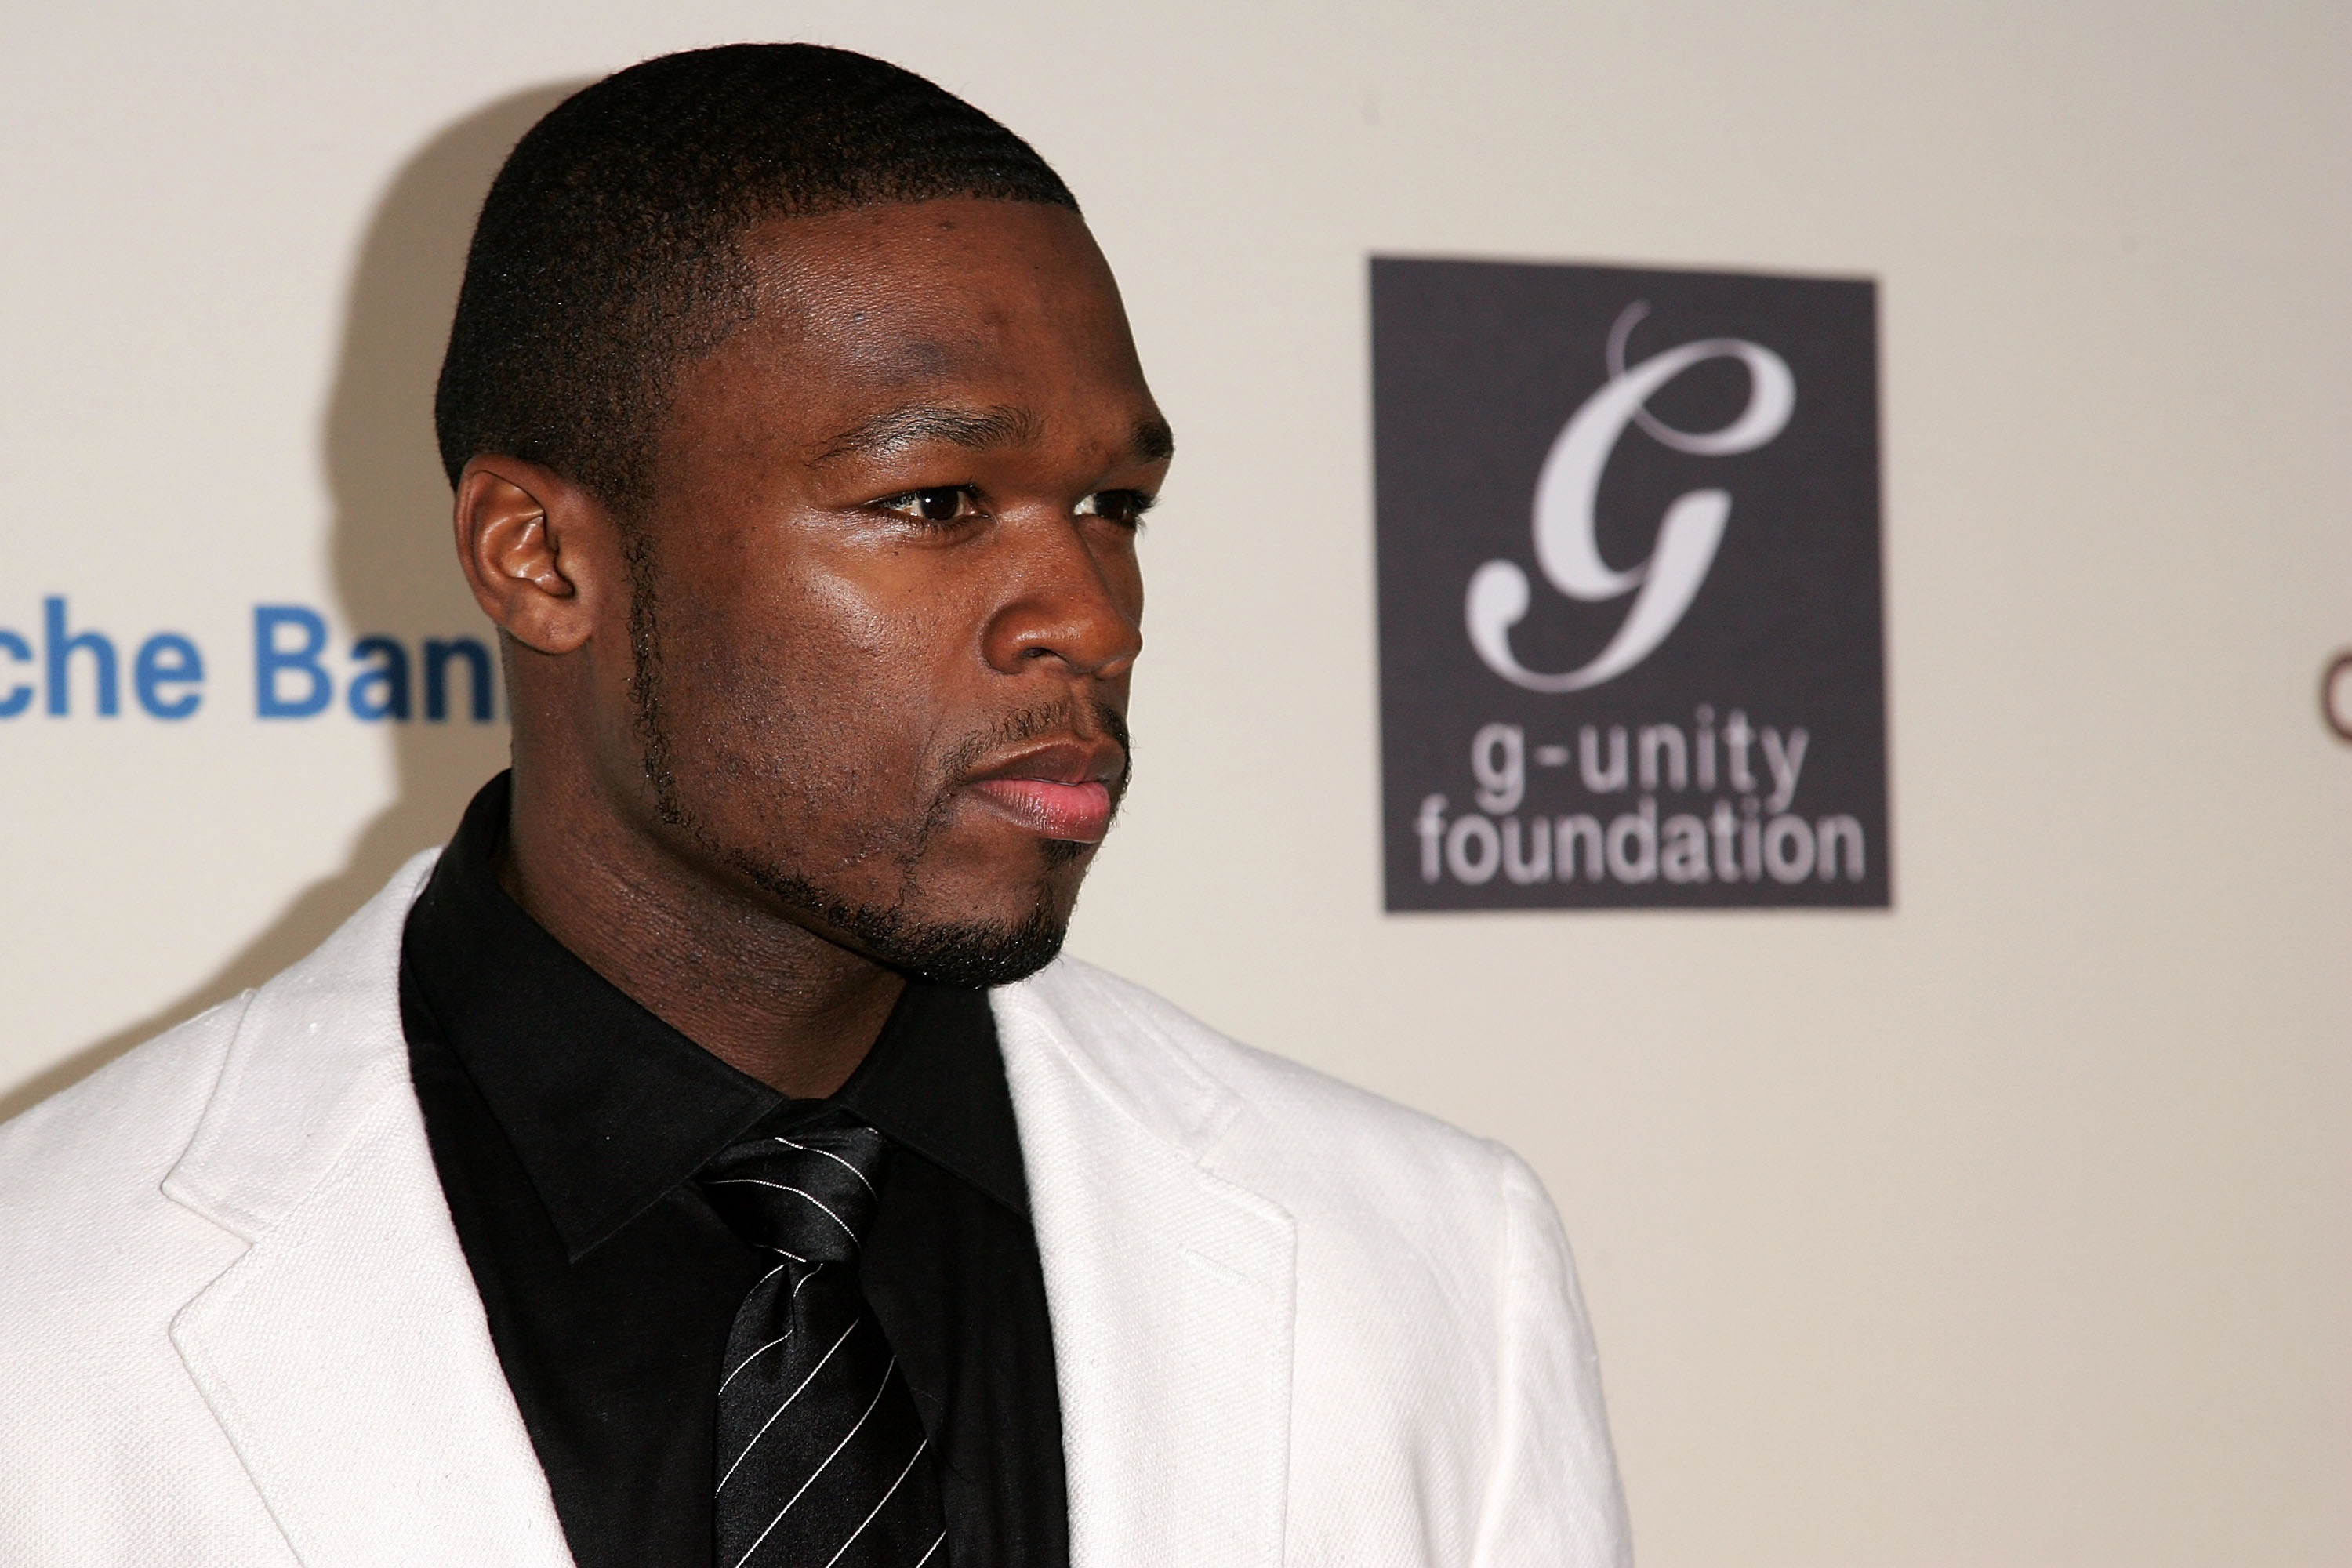 50 the Philanthropist - - Image 1 from Out and About: 50 Cent